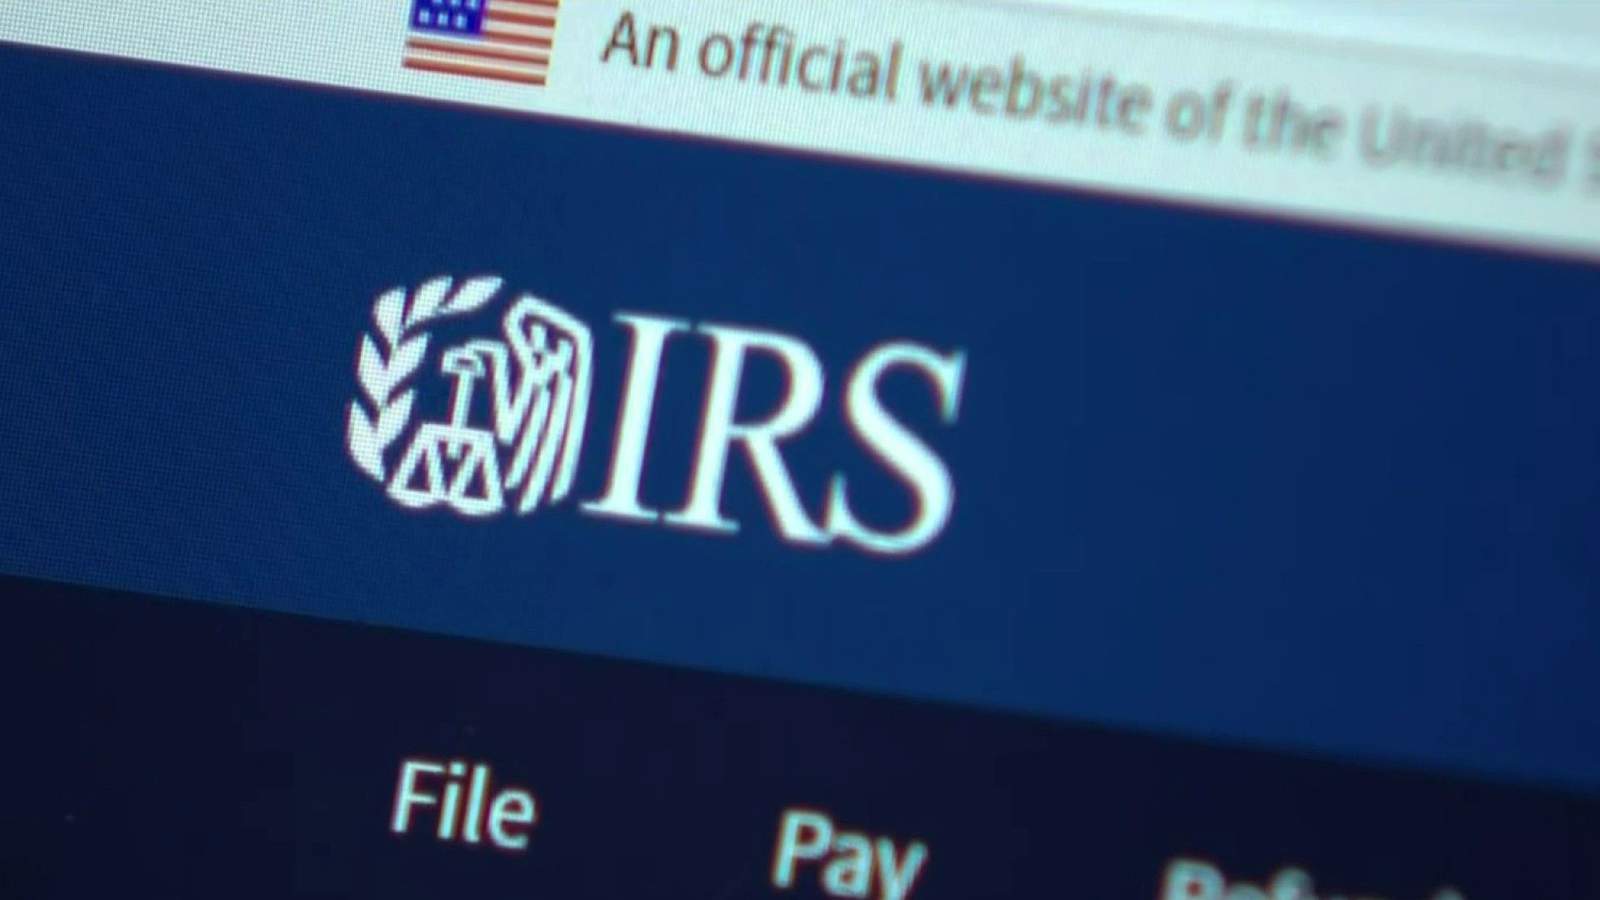 Didn’t file taxes? Here’s how you can get your stimulus check faster and electronically